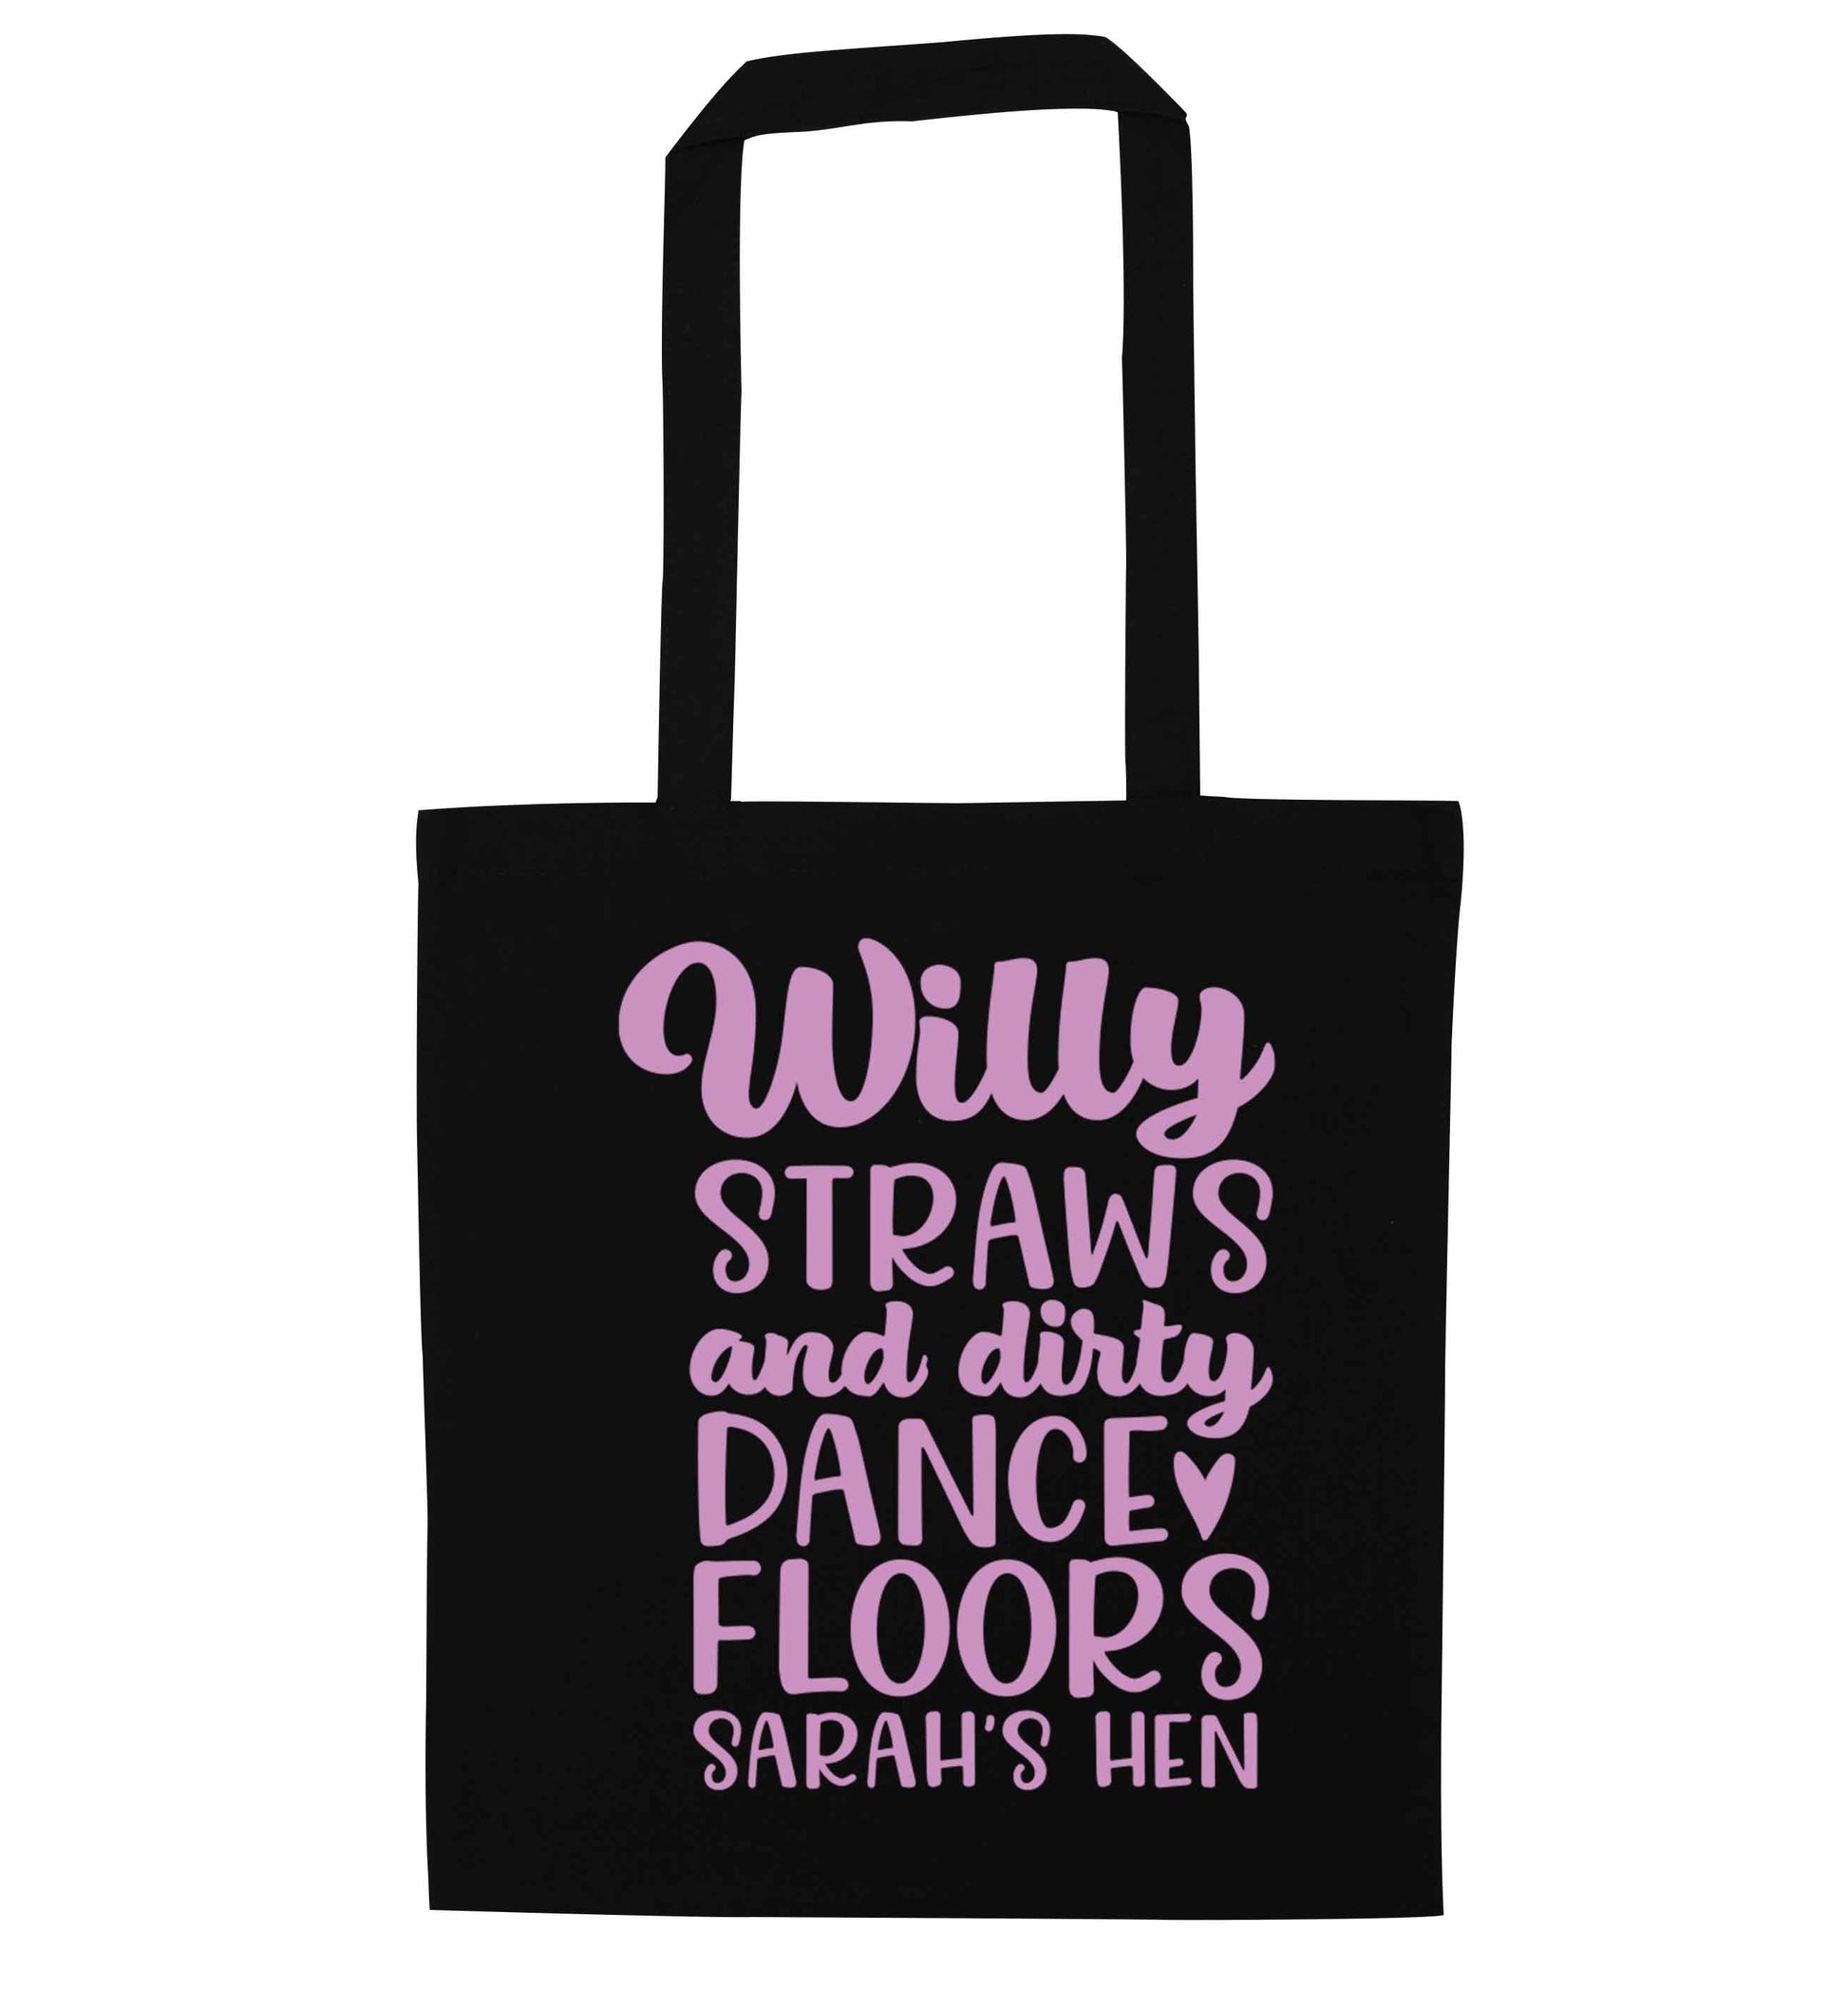 Willy straws and dirty dance floors black tote bag